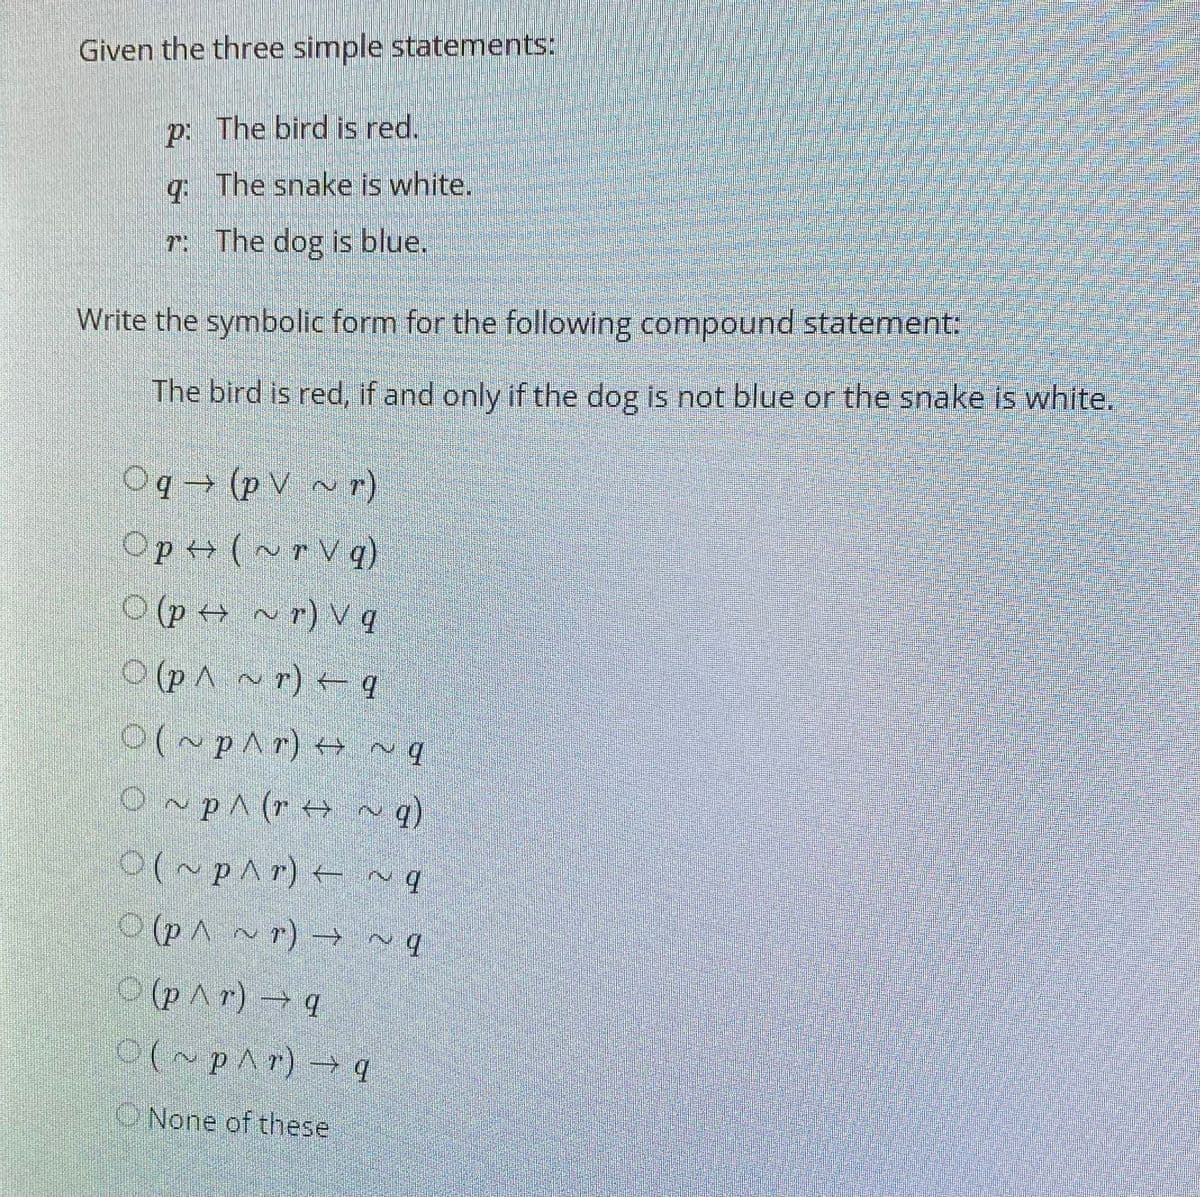 Given the three simple statements:
p: The bird is red.
q The snake is white.
T: The dog is blue,
Write the symbolic form for the following compound statement:
The bird is red, if and only if the dog is not blue or the snake is white.
Oq → (p V ~r)
Op+ (~ r V q)
O (po ~r) V q
(PA ~ r) + q
0(~p^r) + ~q
O~pA (r + ^ q)
OlupAr) - ~q
O (pA ~r) → ~q
O (pAr)q
0(~pAr) → q
ONone of these
